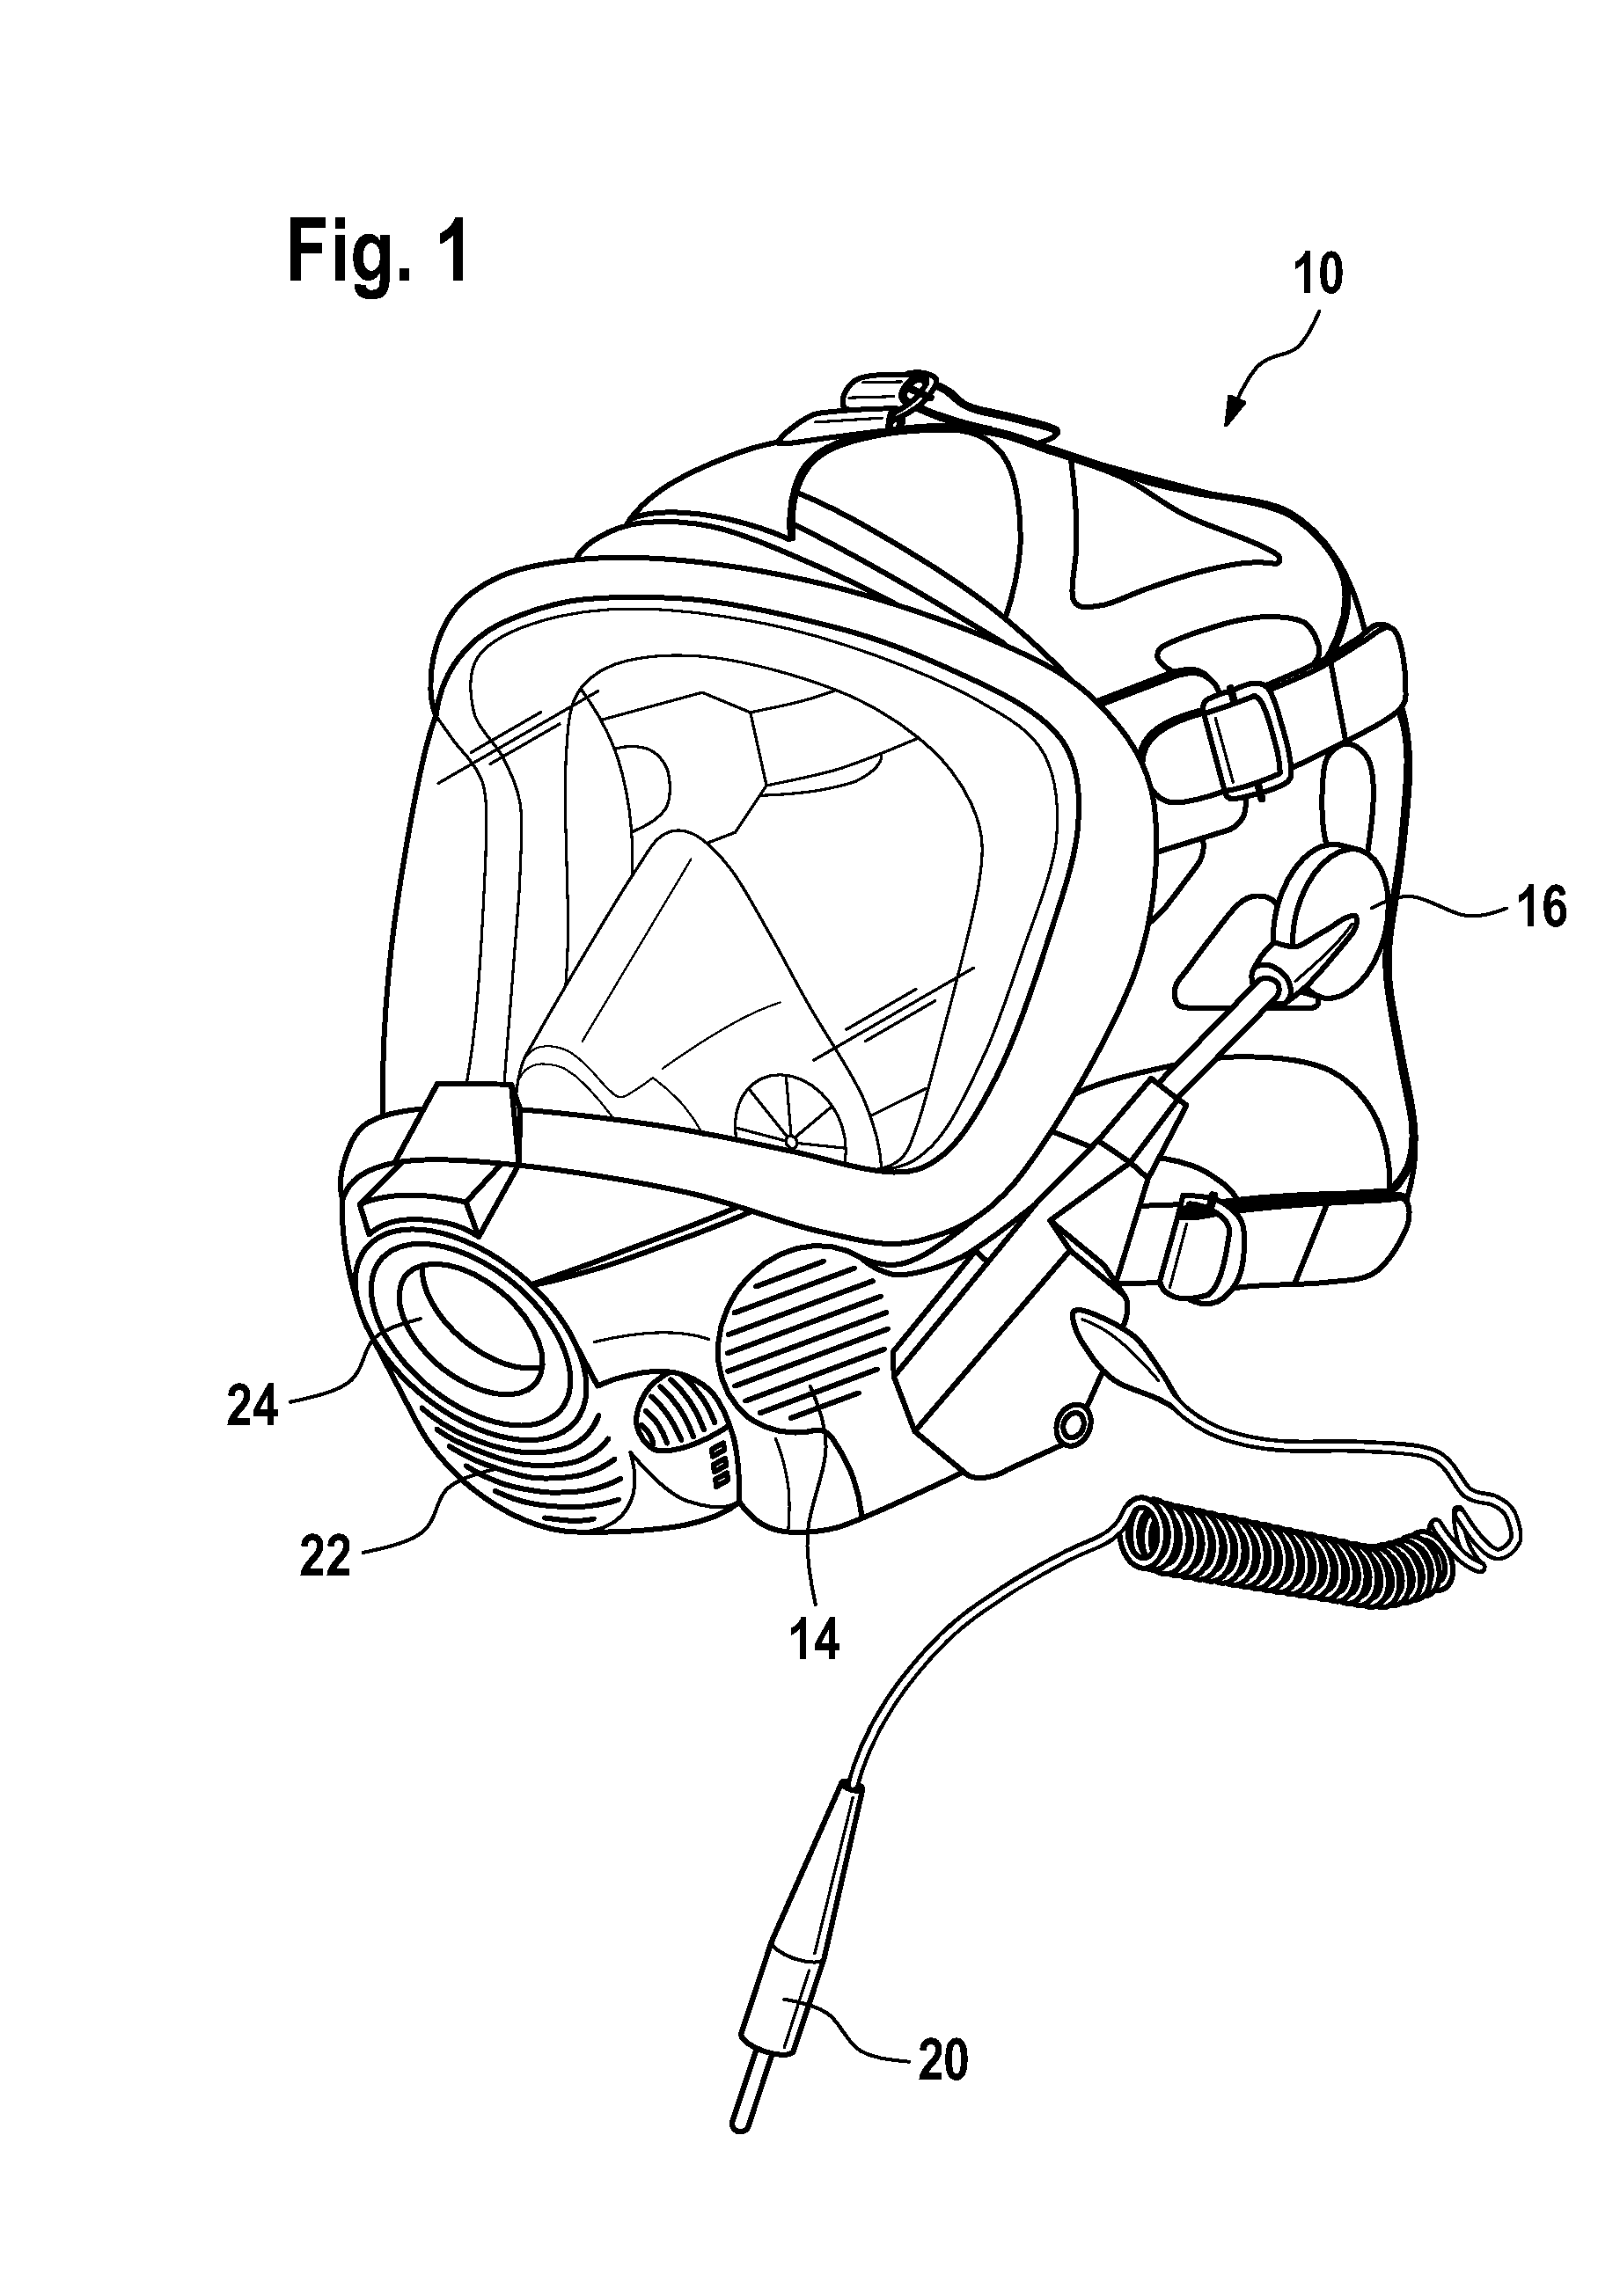 Supply circuit in a communication system of a protective headgear, protective headgear with such a supply circuit and method for operating such a supply circuit